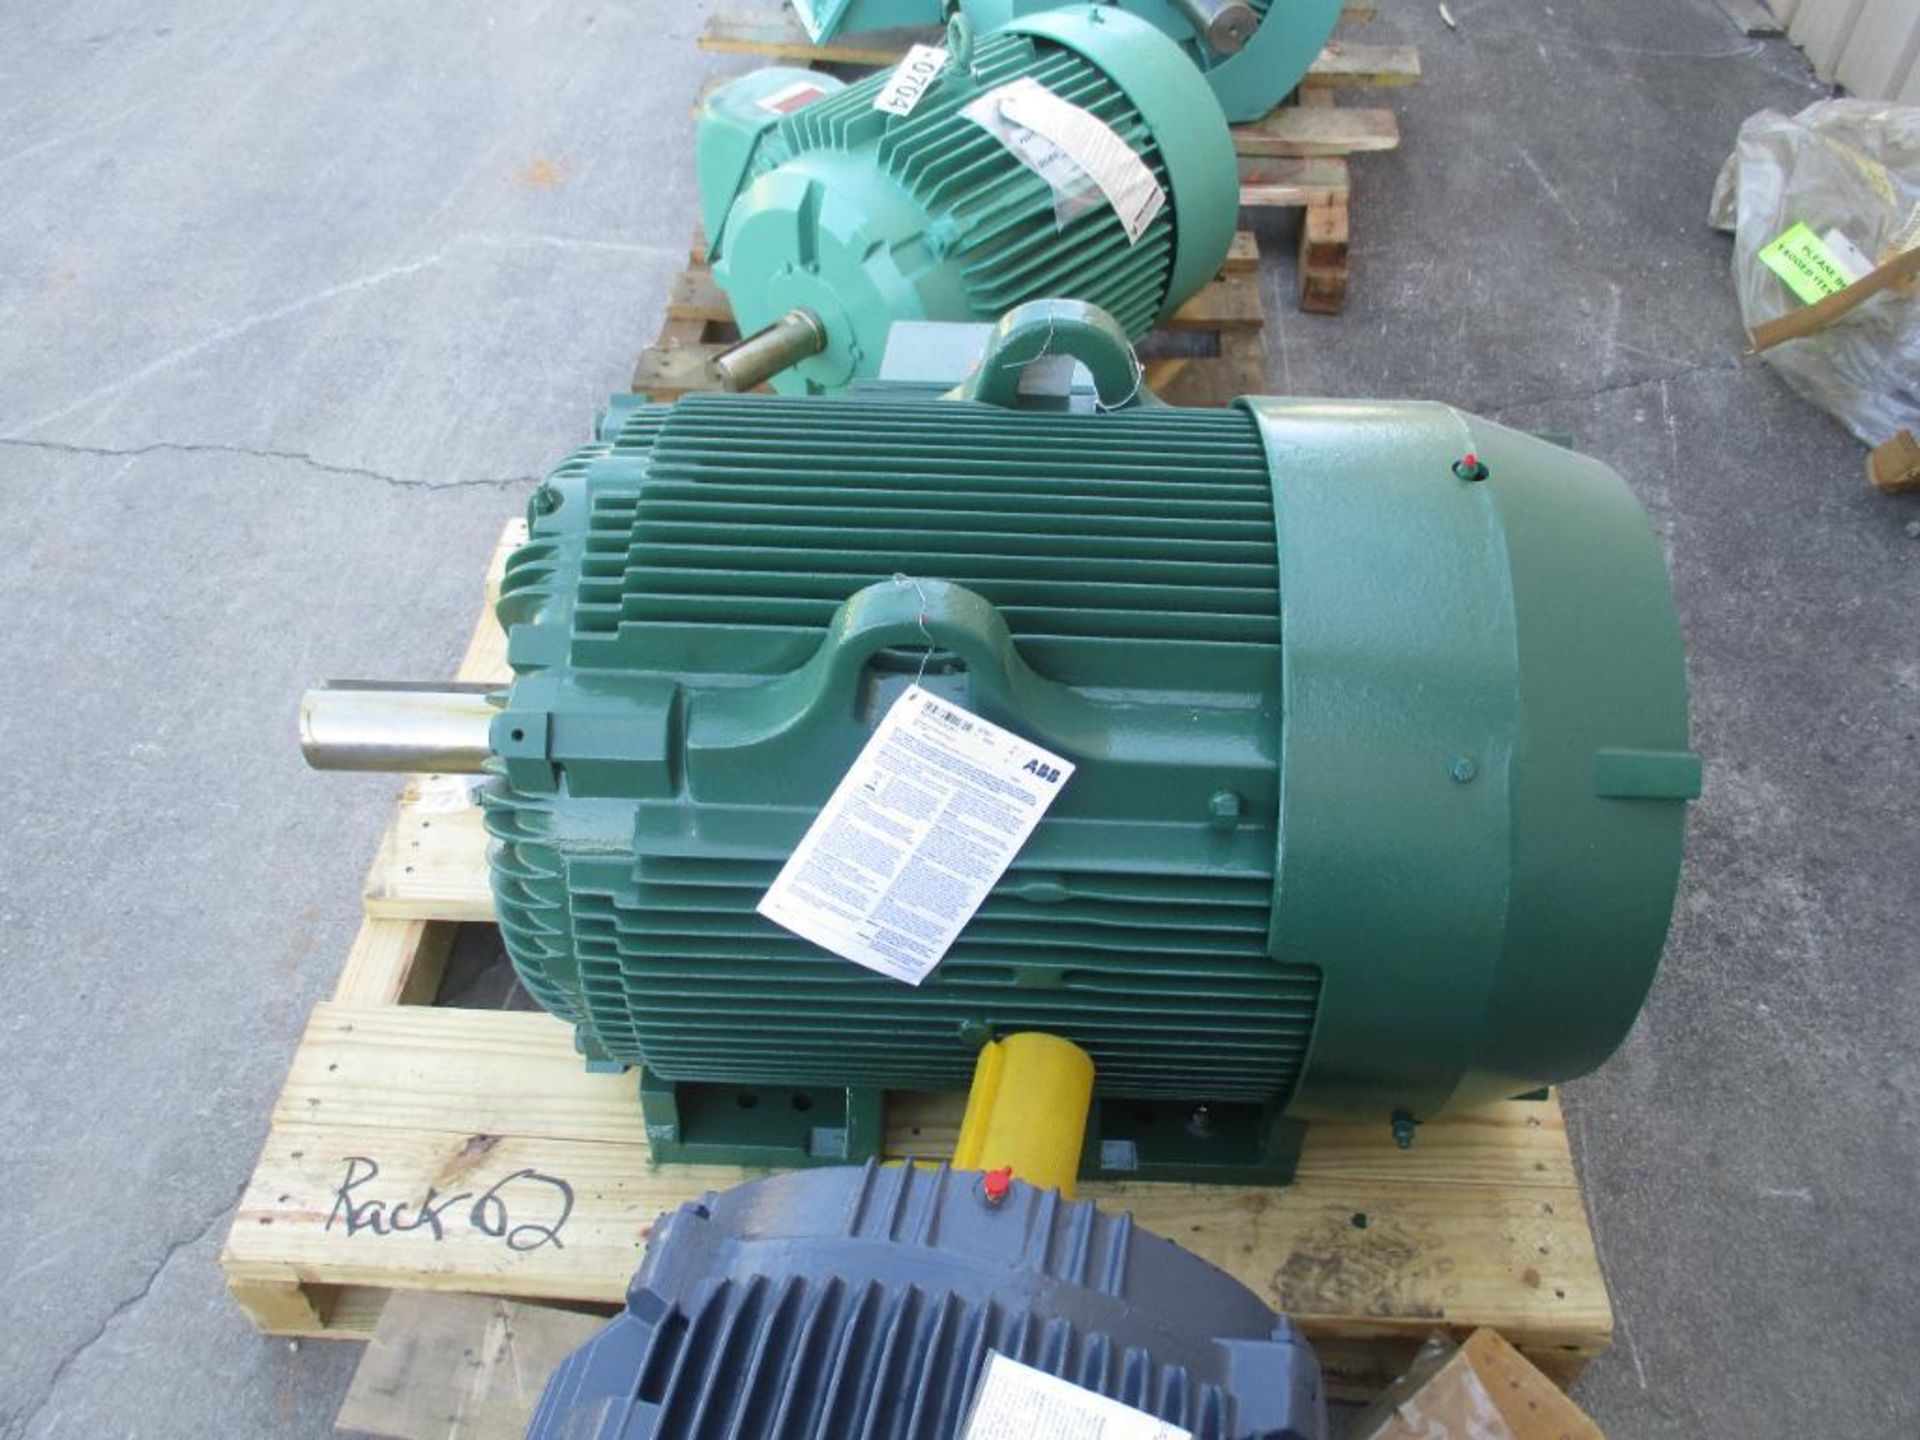 BALDOR-RELIANCE SUPER-E SEVERE DUTY XEX A44-5001-5305 60HP 890RPM 445T FRAME 60HZ 3 PHASE ELECTRIC M - Image 4 of 6